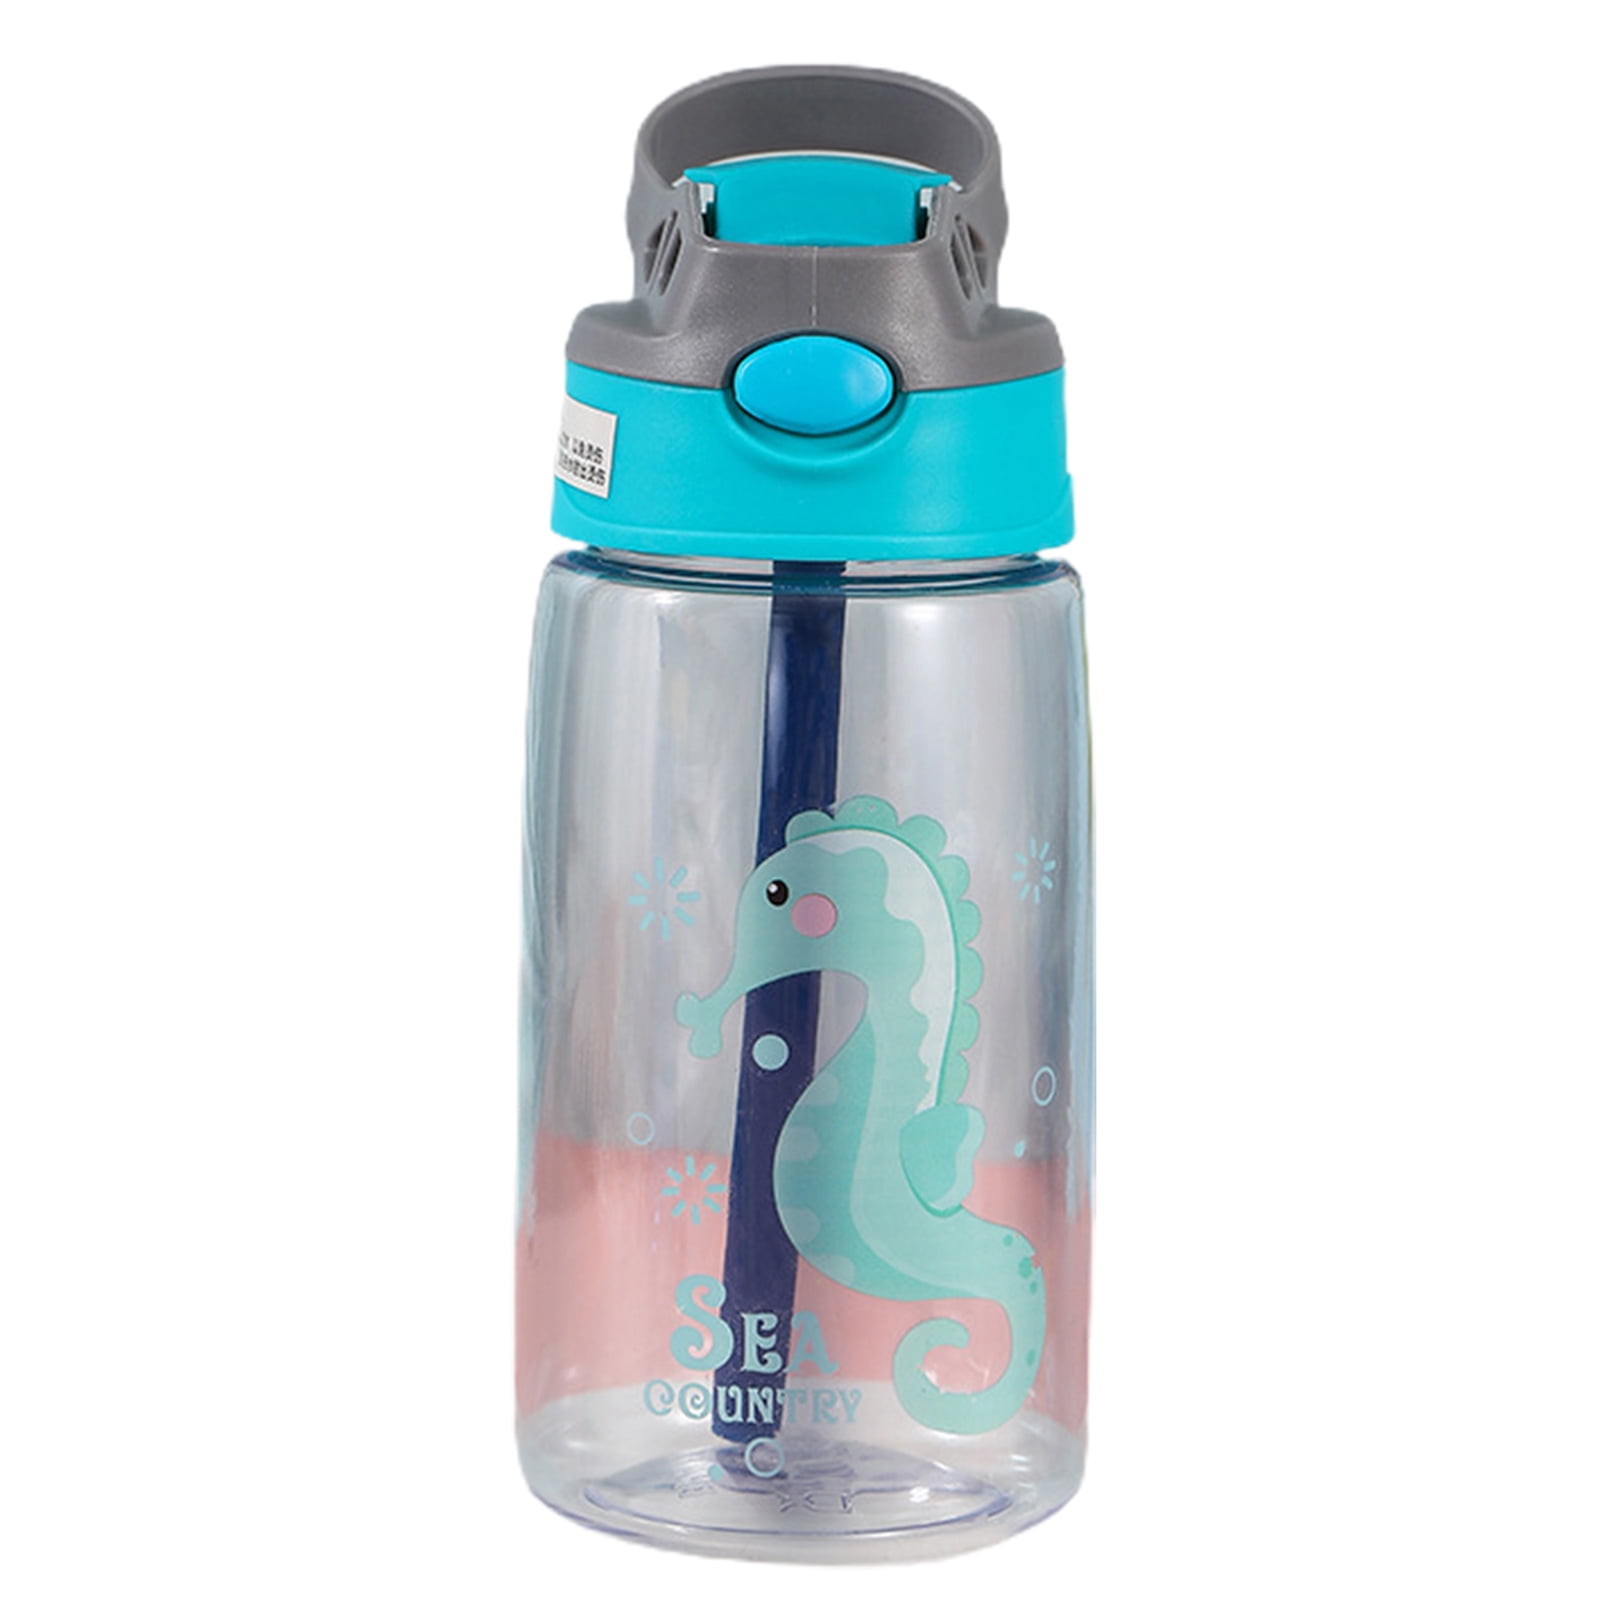 1pc 480ml Kids Water Bottle For School Boys Girls, Cup With Straw, Cute  Cartoon Leak-proof Mug, Portable Travel Drinking Tumbler,Baby feeding cup,sippy  cup